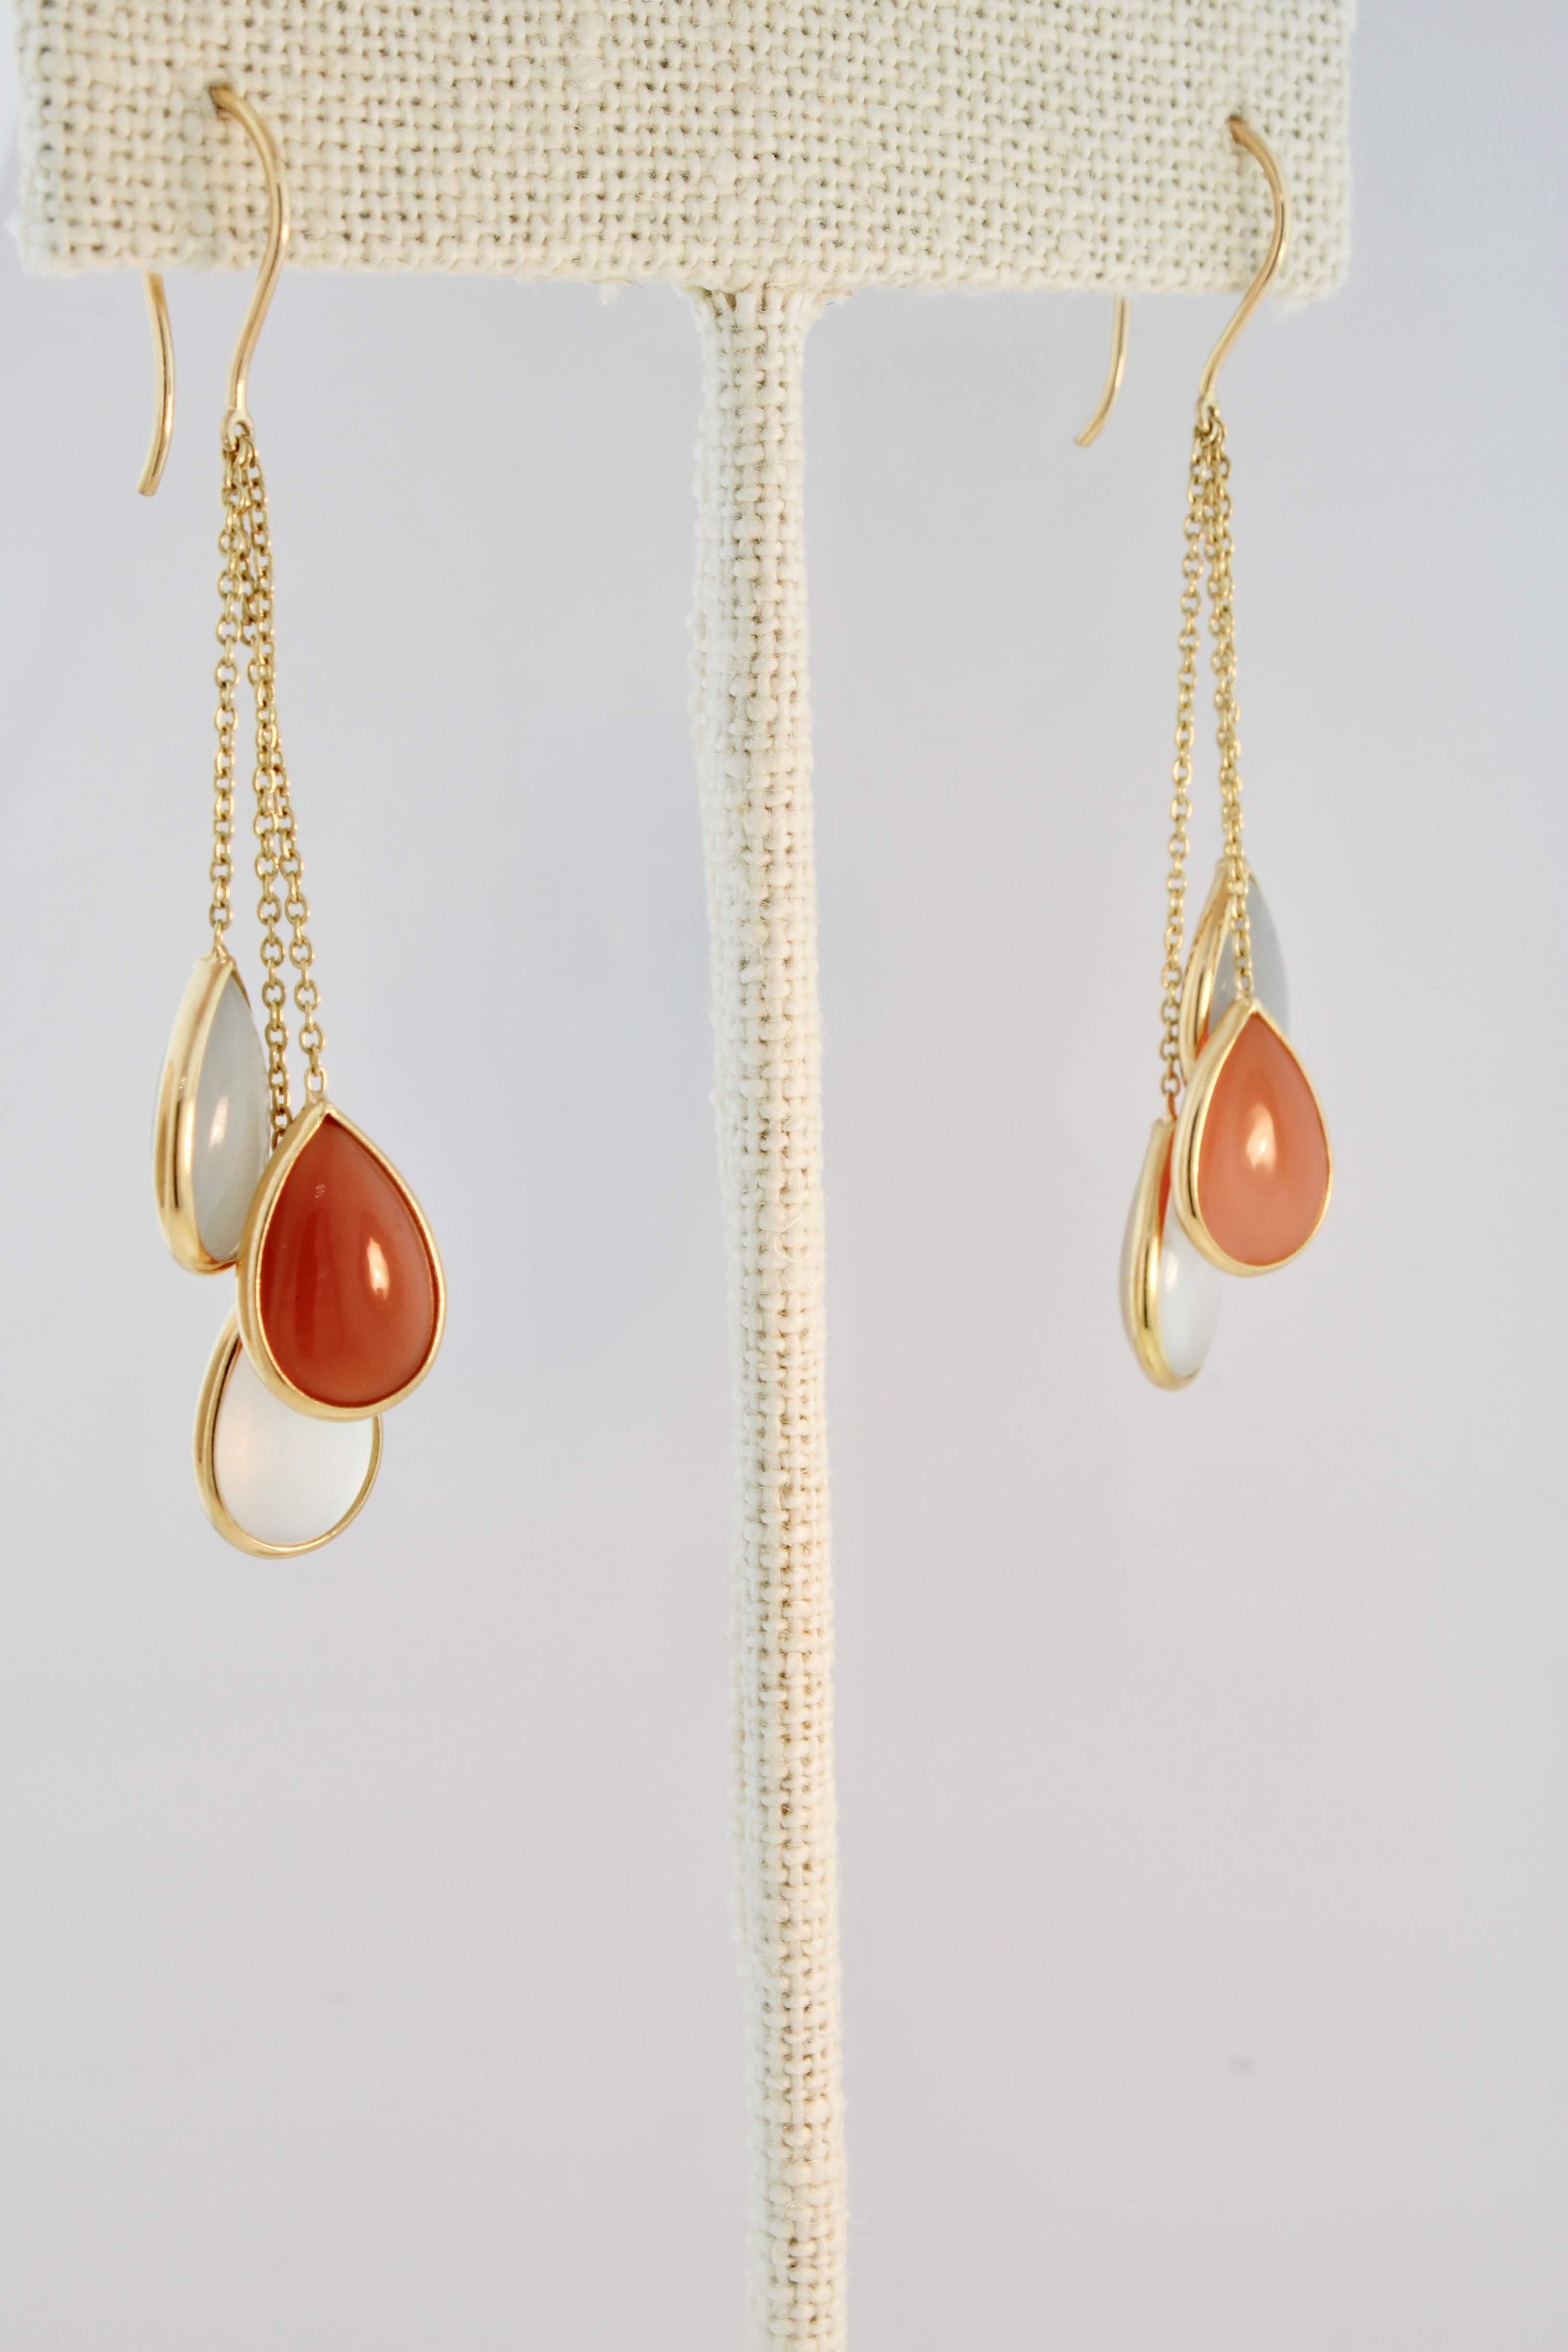 Nari Fine Jewels Handcrafted Moonstone Dangle Earrings in 18k In New Condition For Sale In beverly hills, CA